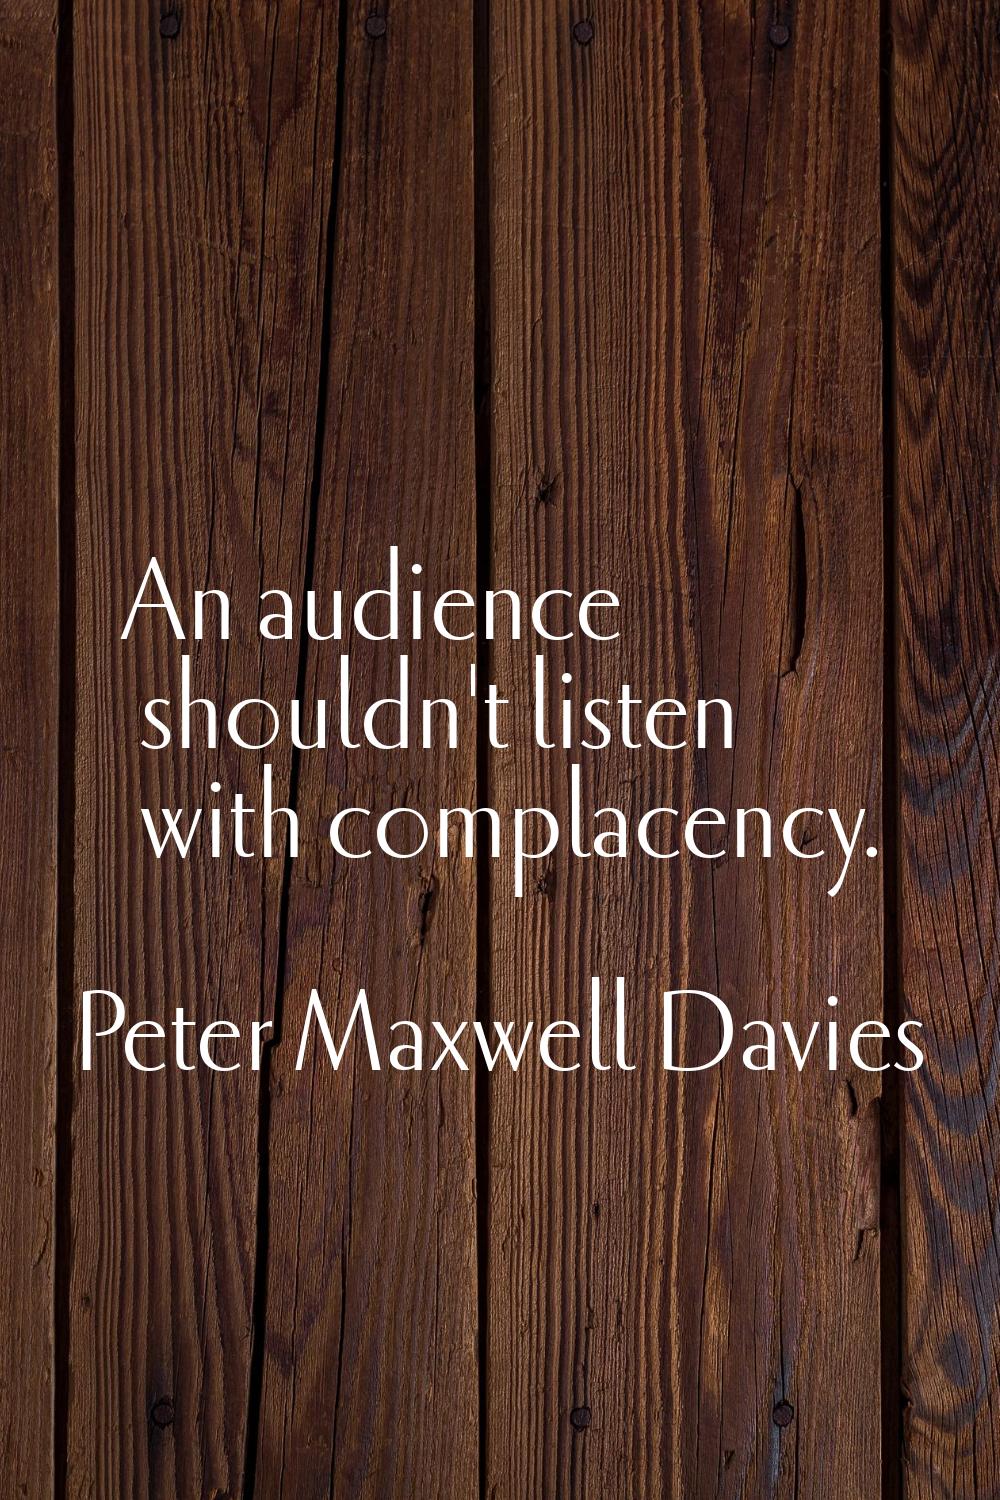 An audience shouldn't listen with complacency.